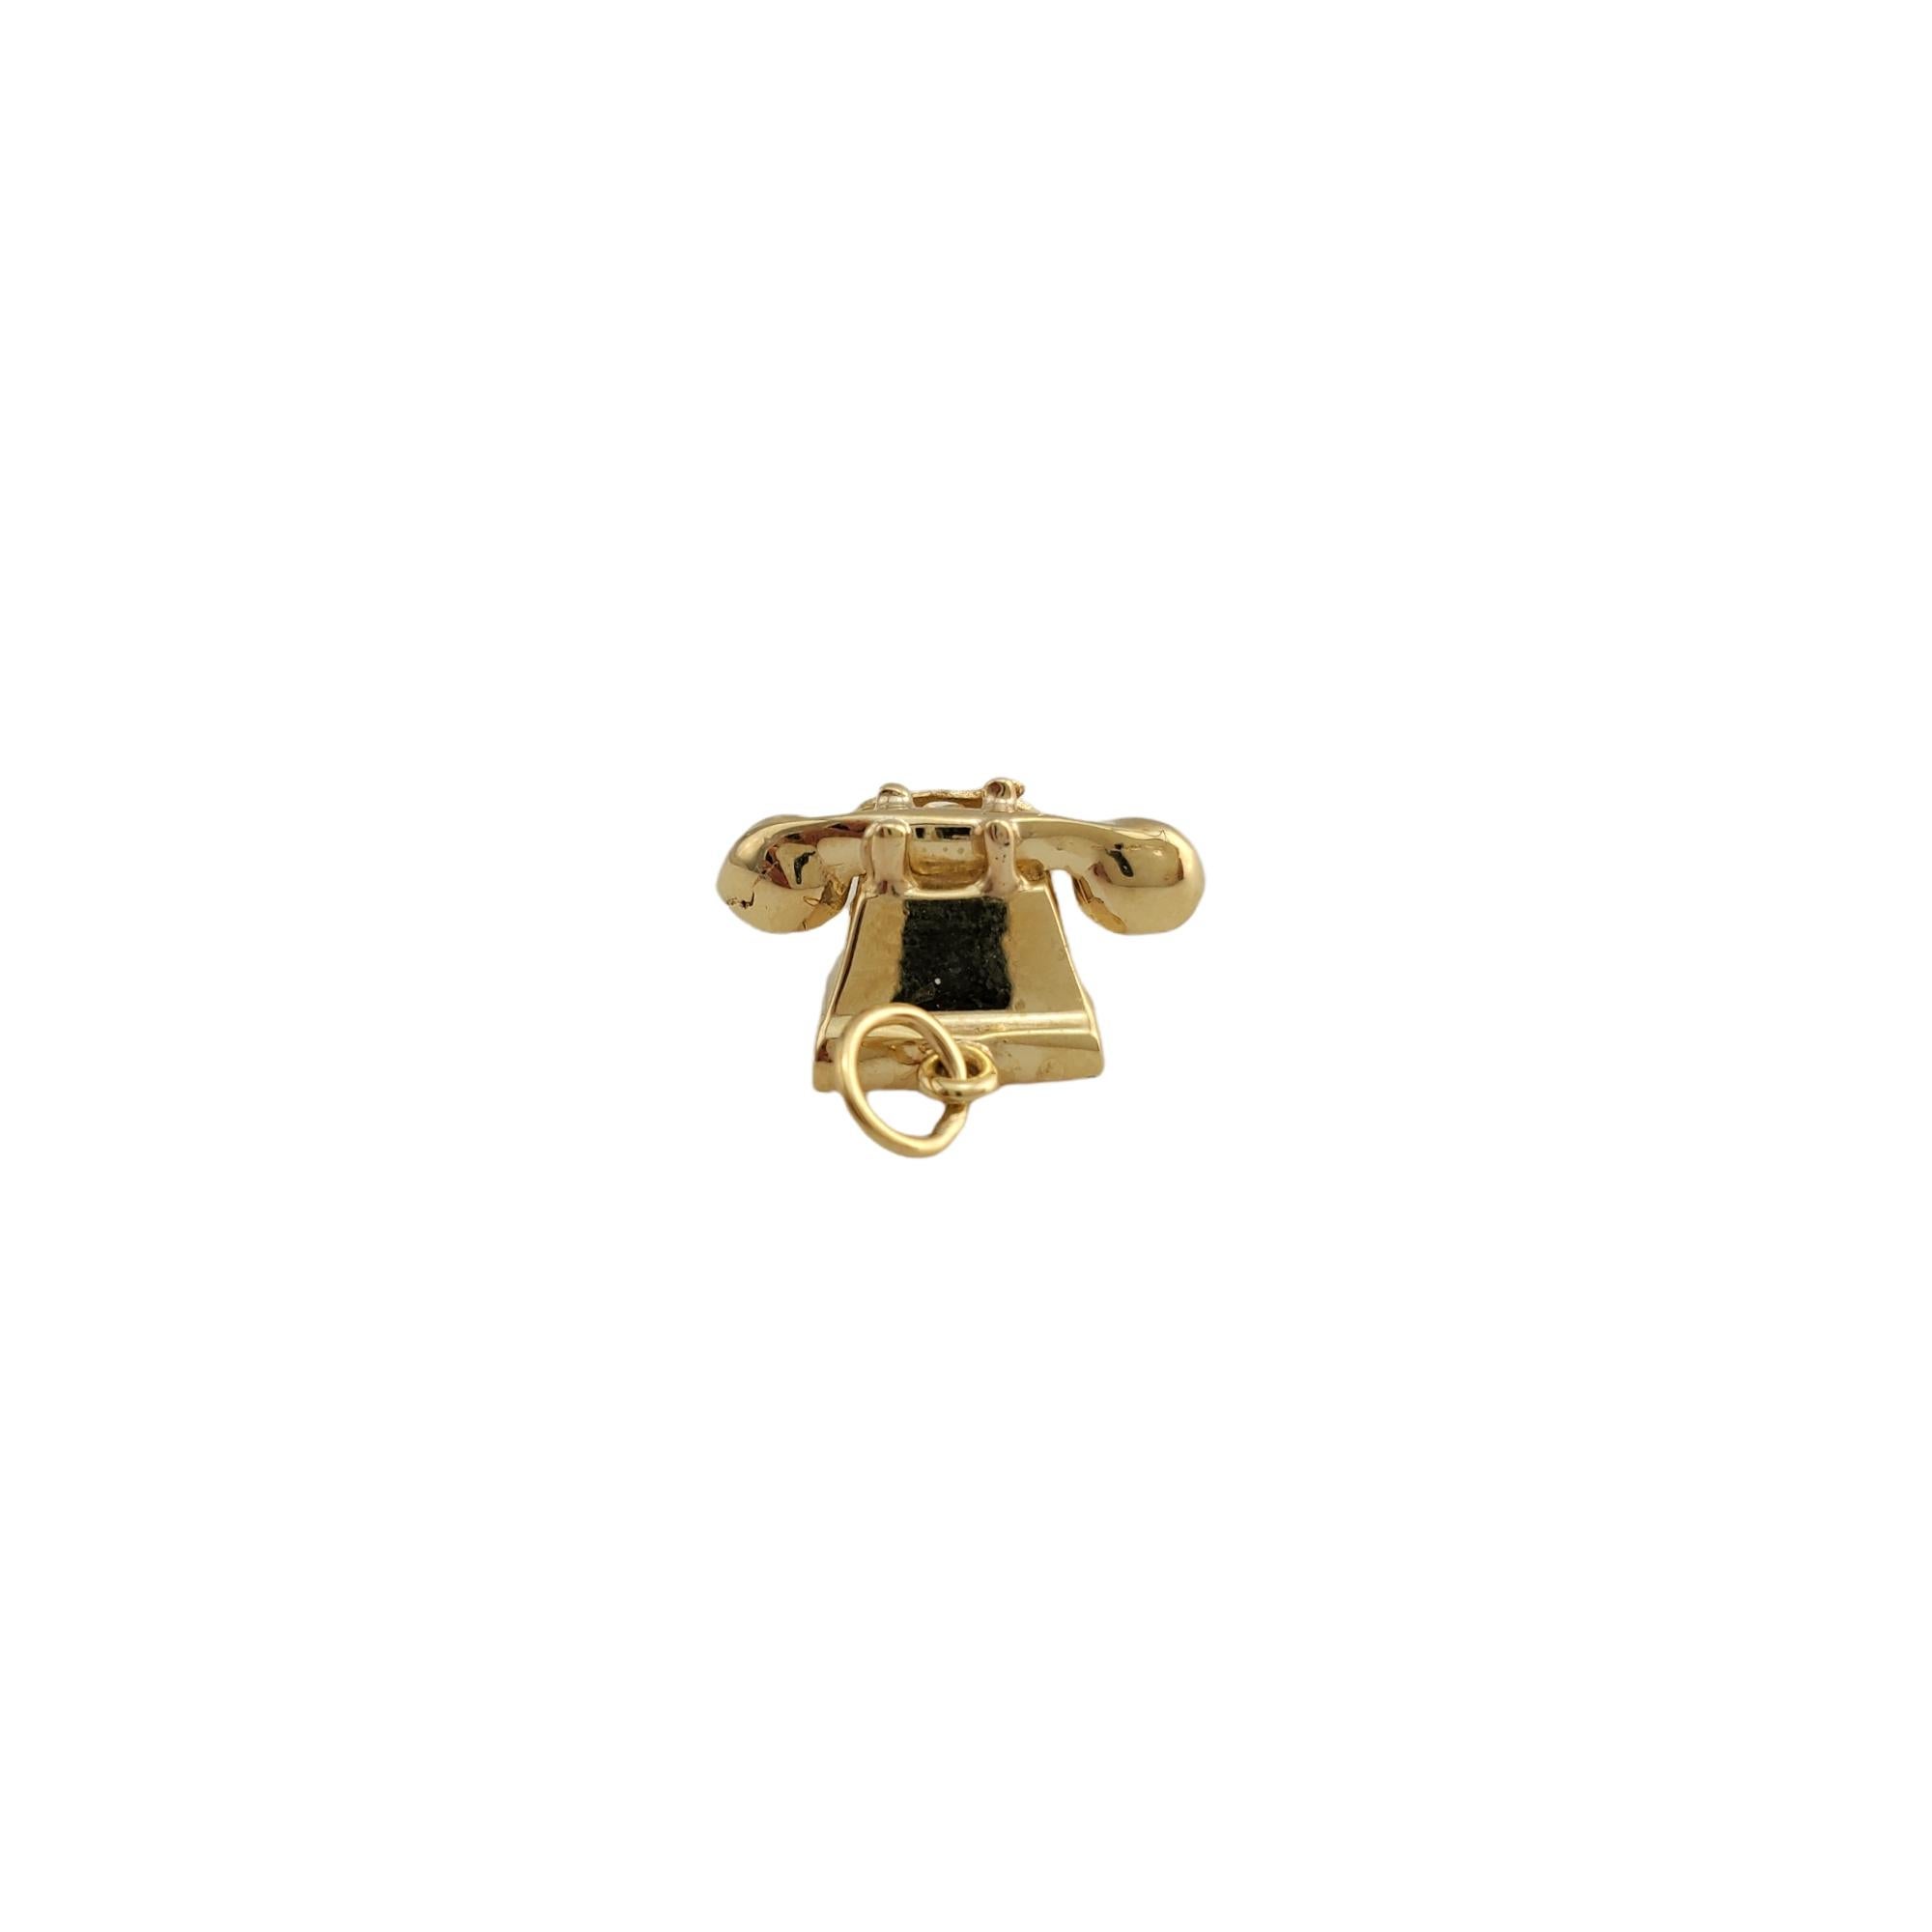 Vintage 14K Yellow Gold Rotary Phone Charm! 

Dial it back with this cute yellow gold rotary phone charm! 

Size: 8.89mm X 17.24mm

Weight: 3.6 gr /  2.3dwt

Hallmark: 14K

Very good condition, professionally polished.

Will come packaged in a gift